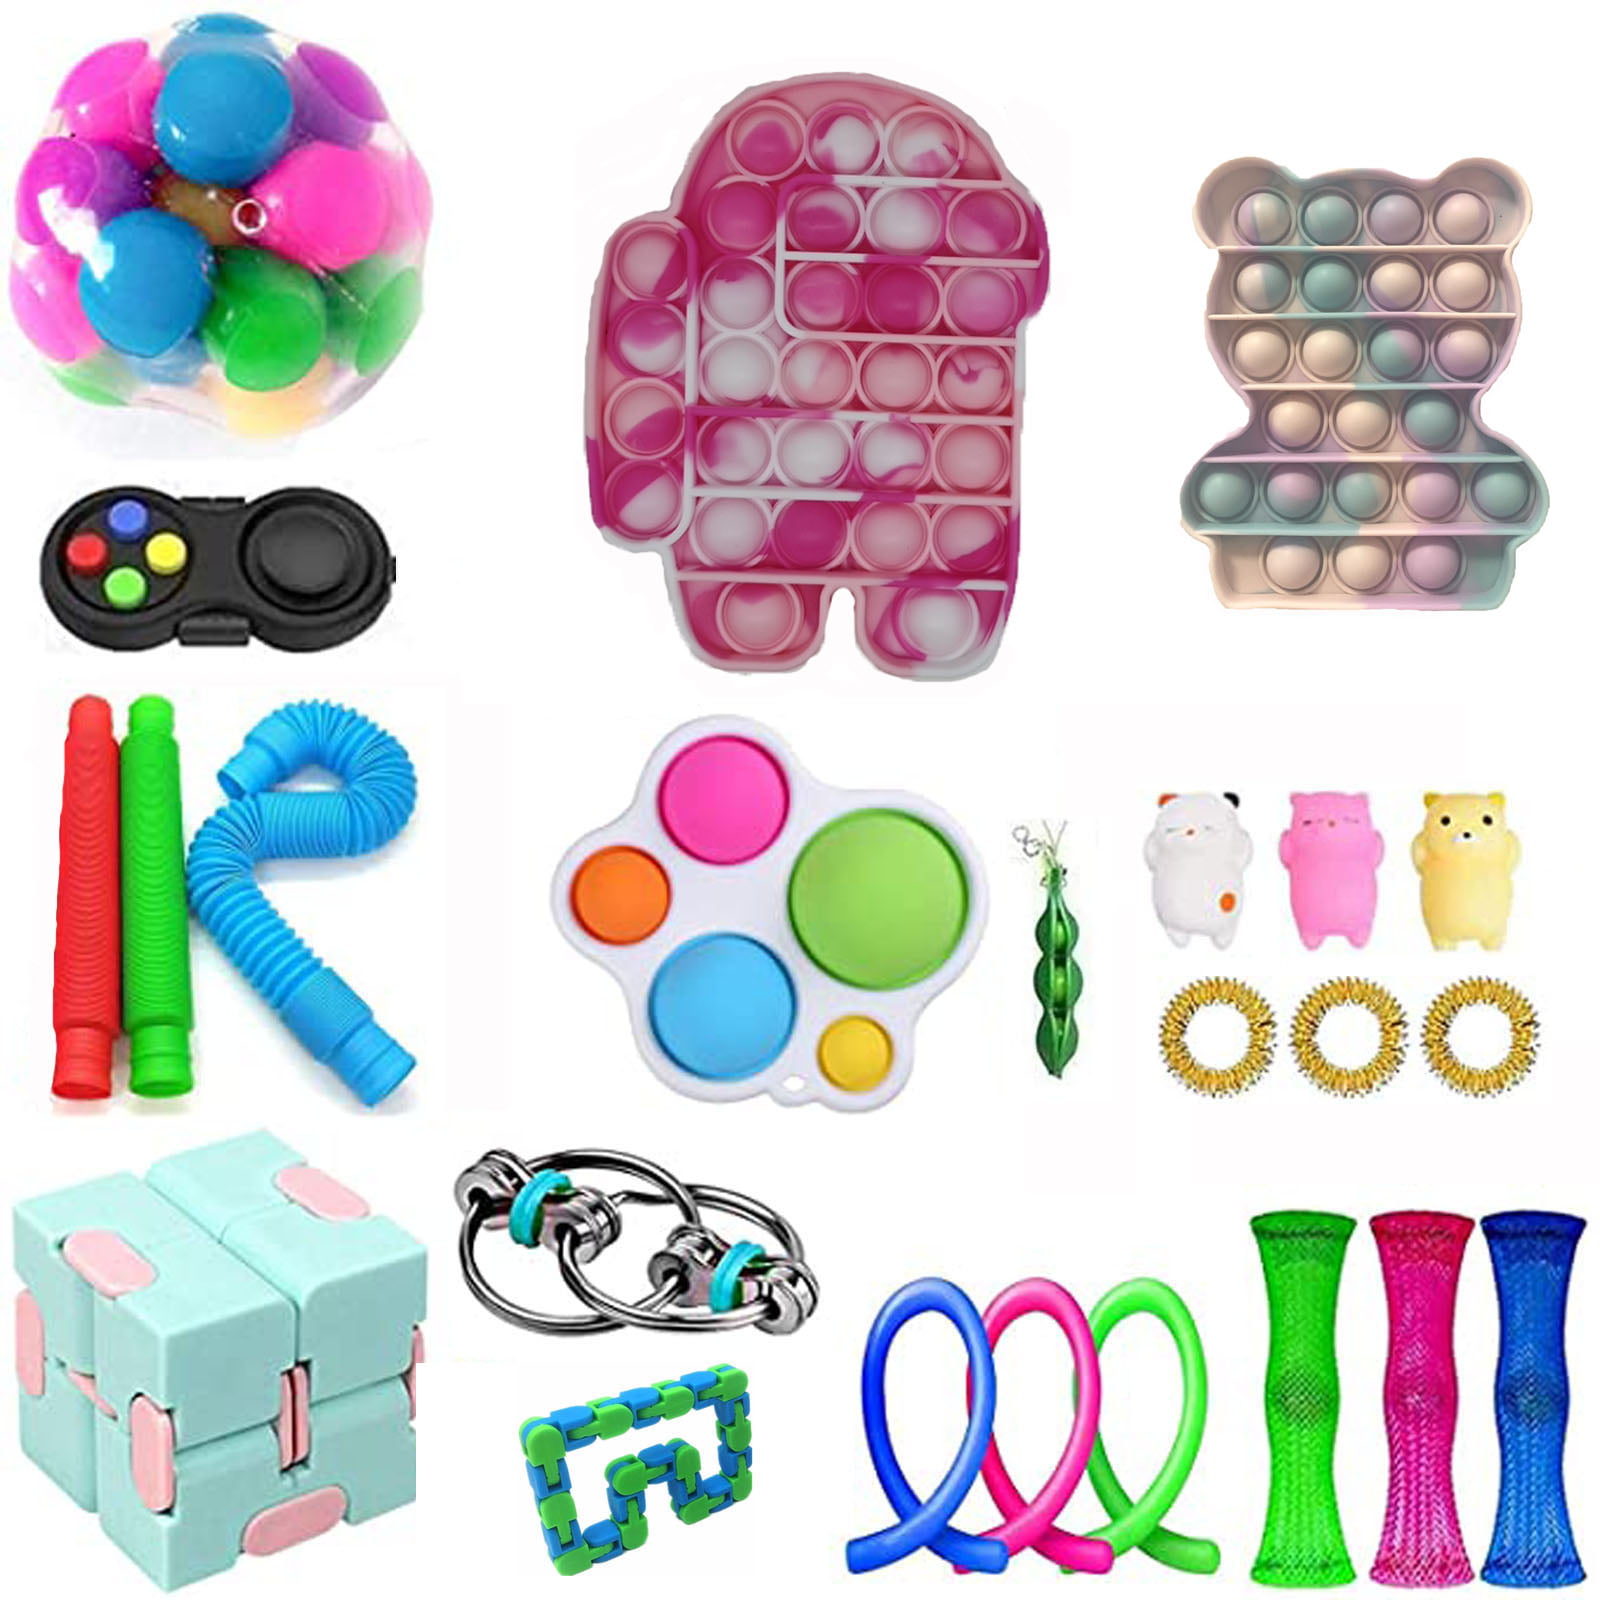 Random Color 30PCS Set, One Size 24Pcs Fidget Toy Set,Sensory Toys Pack Cheap for Kids Adults,Stress Relief and Anti-Anxiety Tools,Fidget Box with Square Simple Dimple &More Fidget Toys 